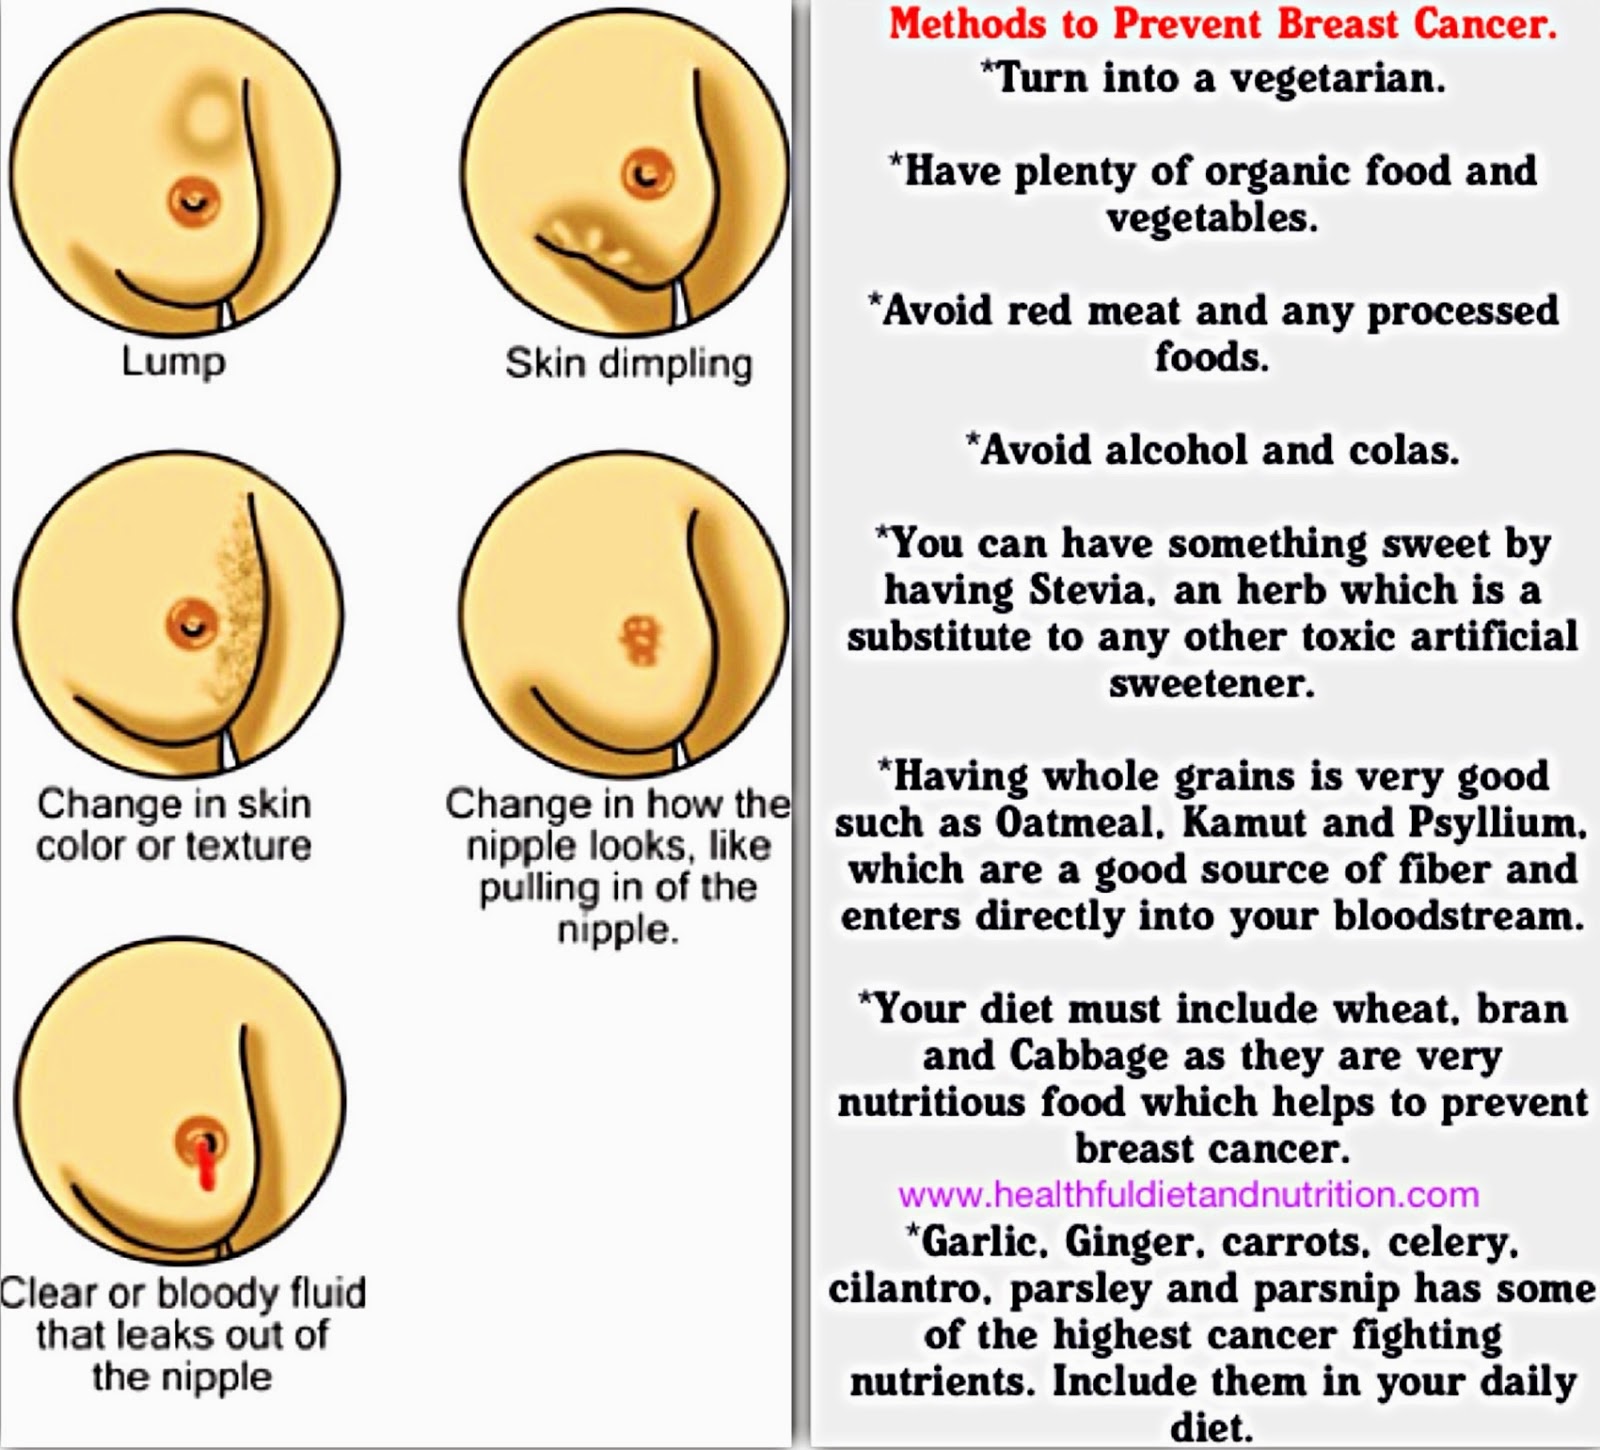 Methods To Prevent Breast Cancer